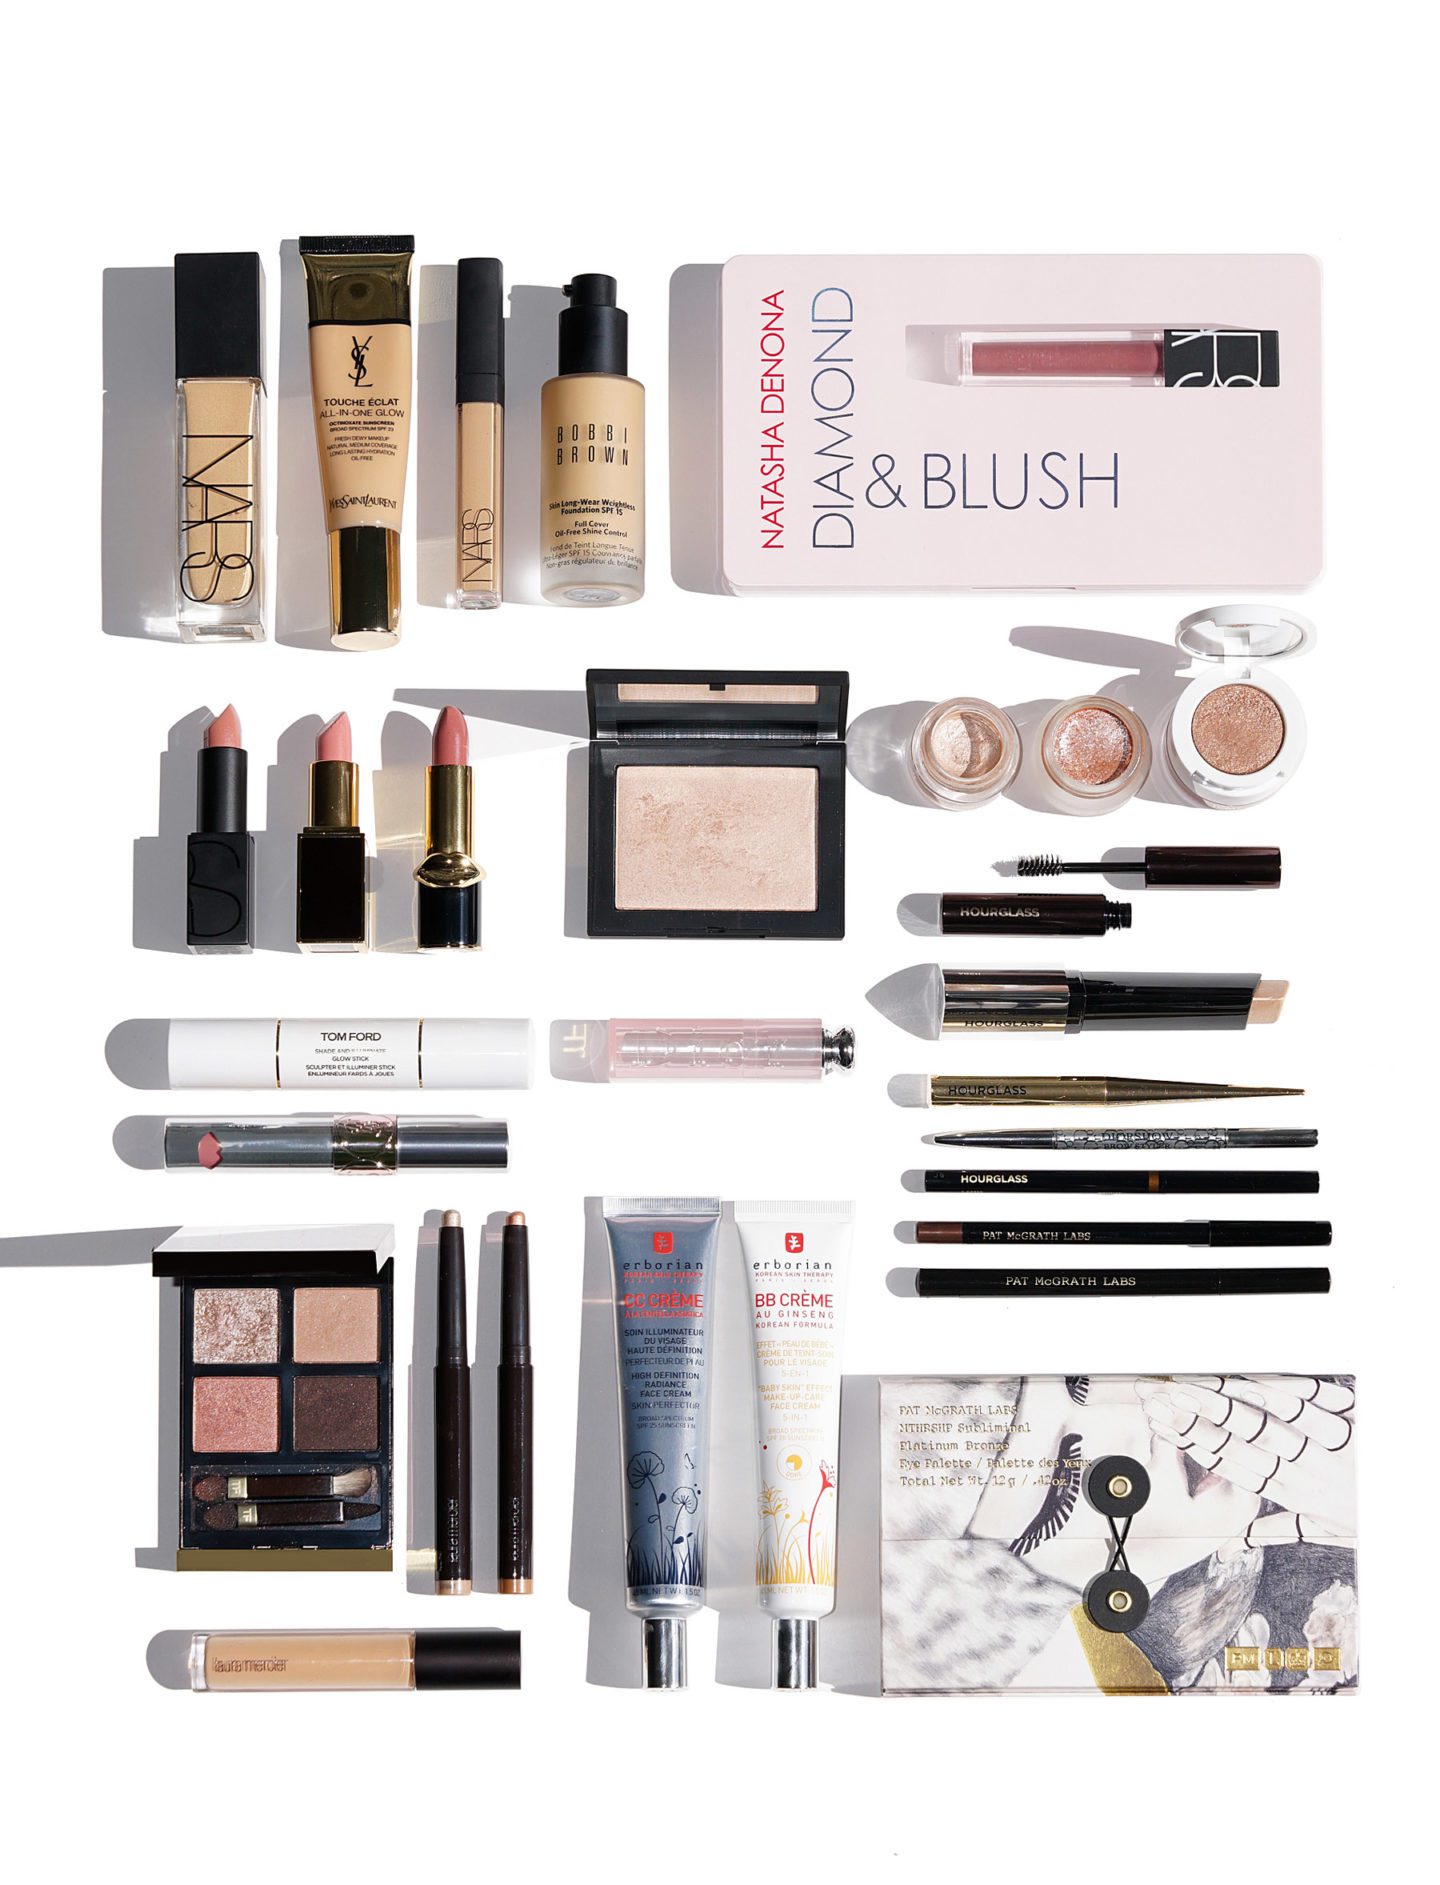 Sephora Beauty Insider Sale Recommendations 2018